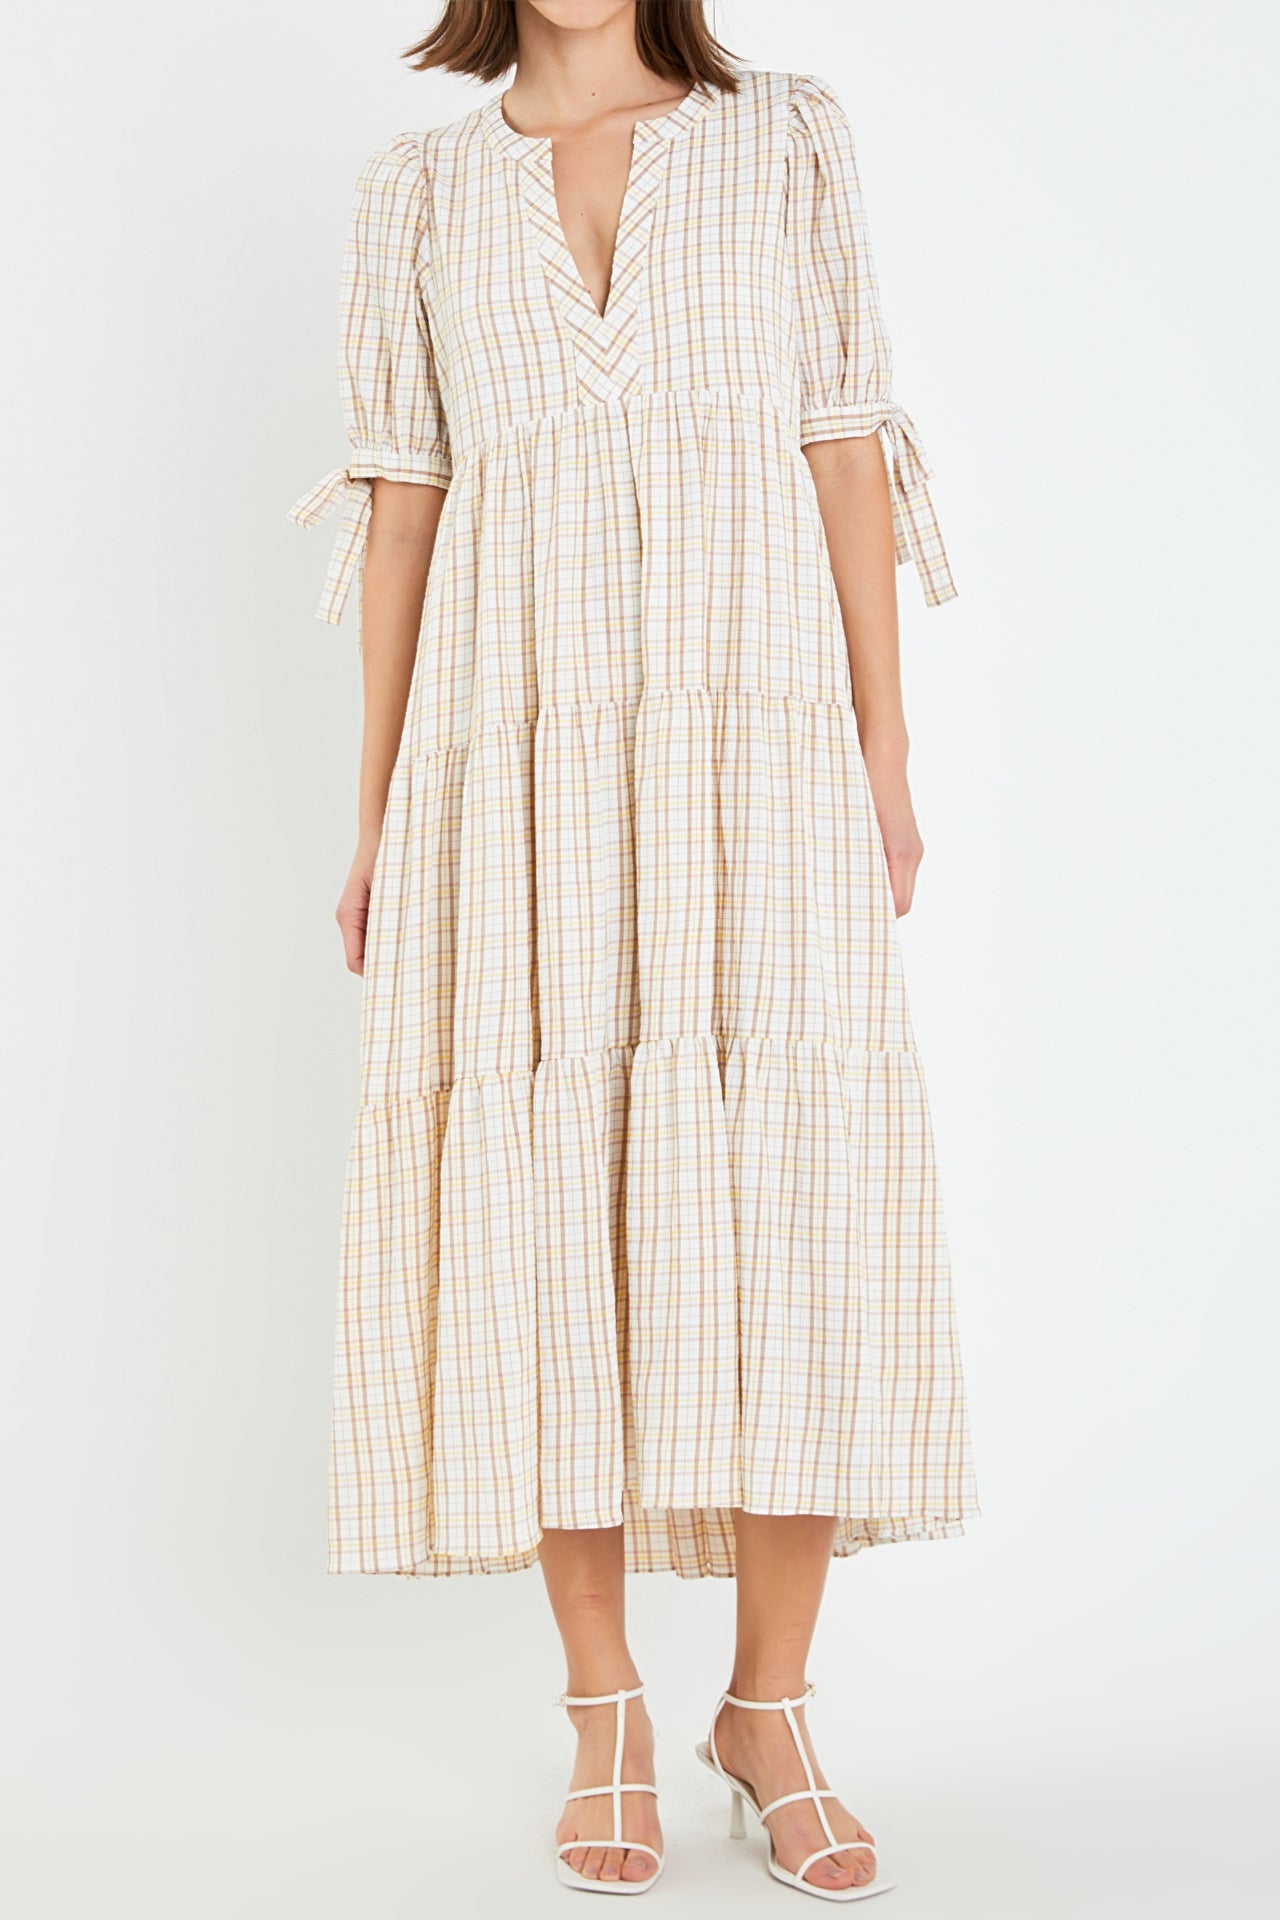 Gingham Tiered Dress with Bow-Tie Sleeves